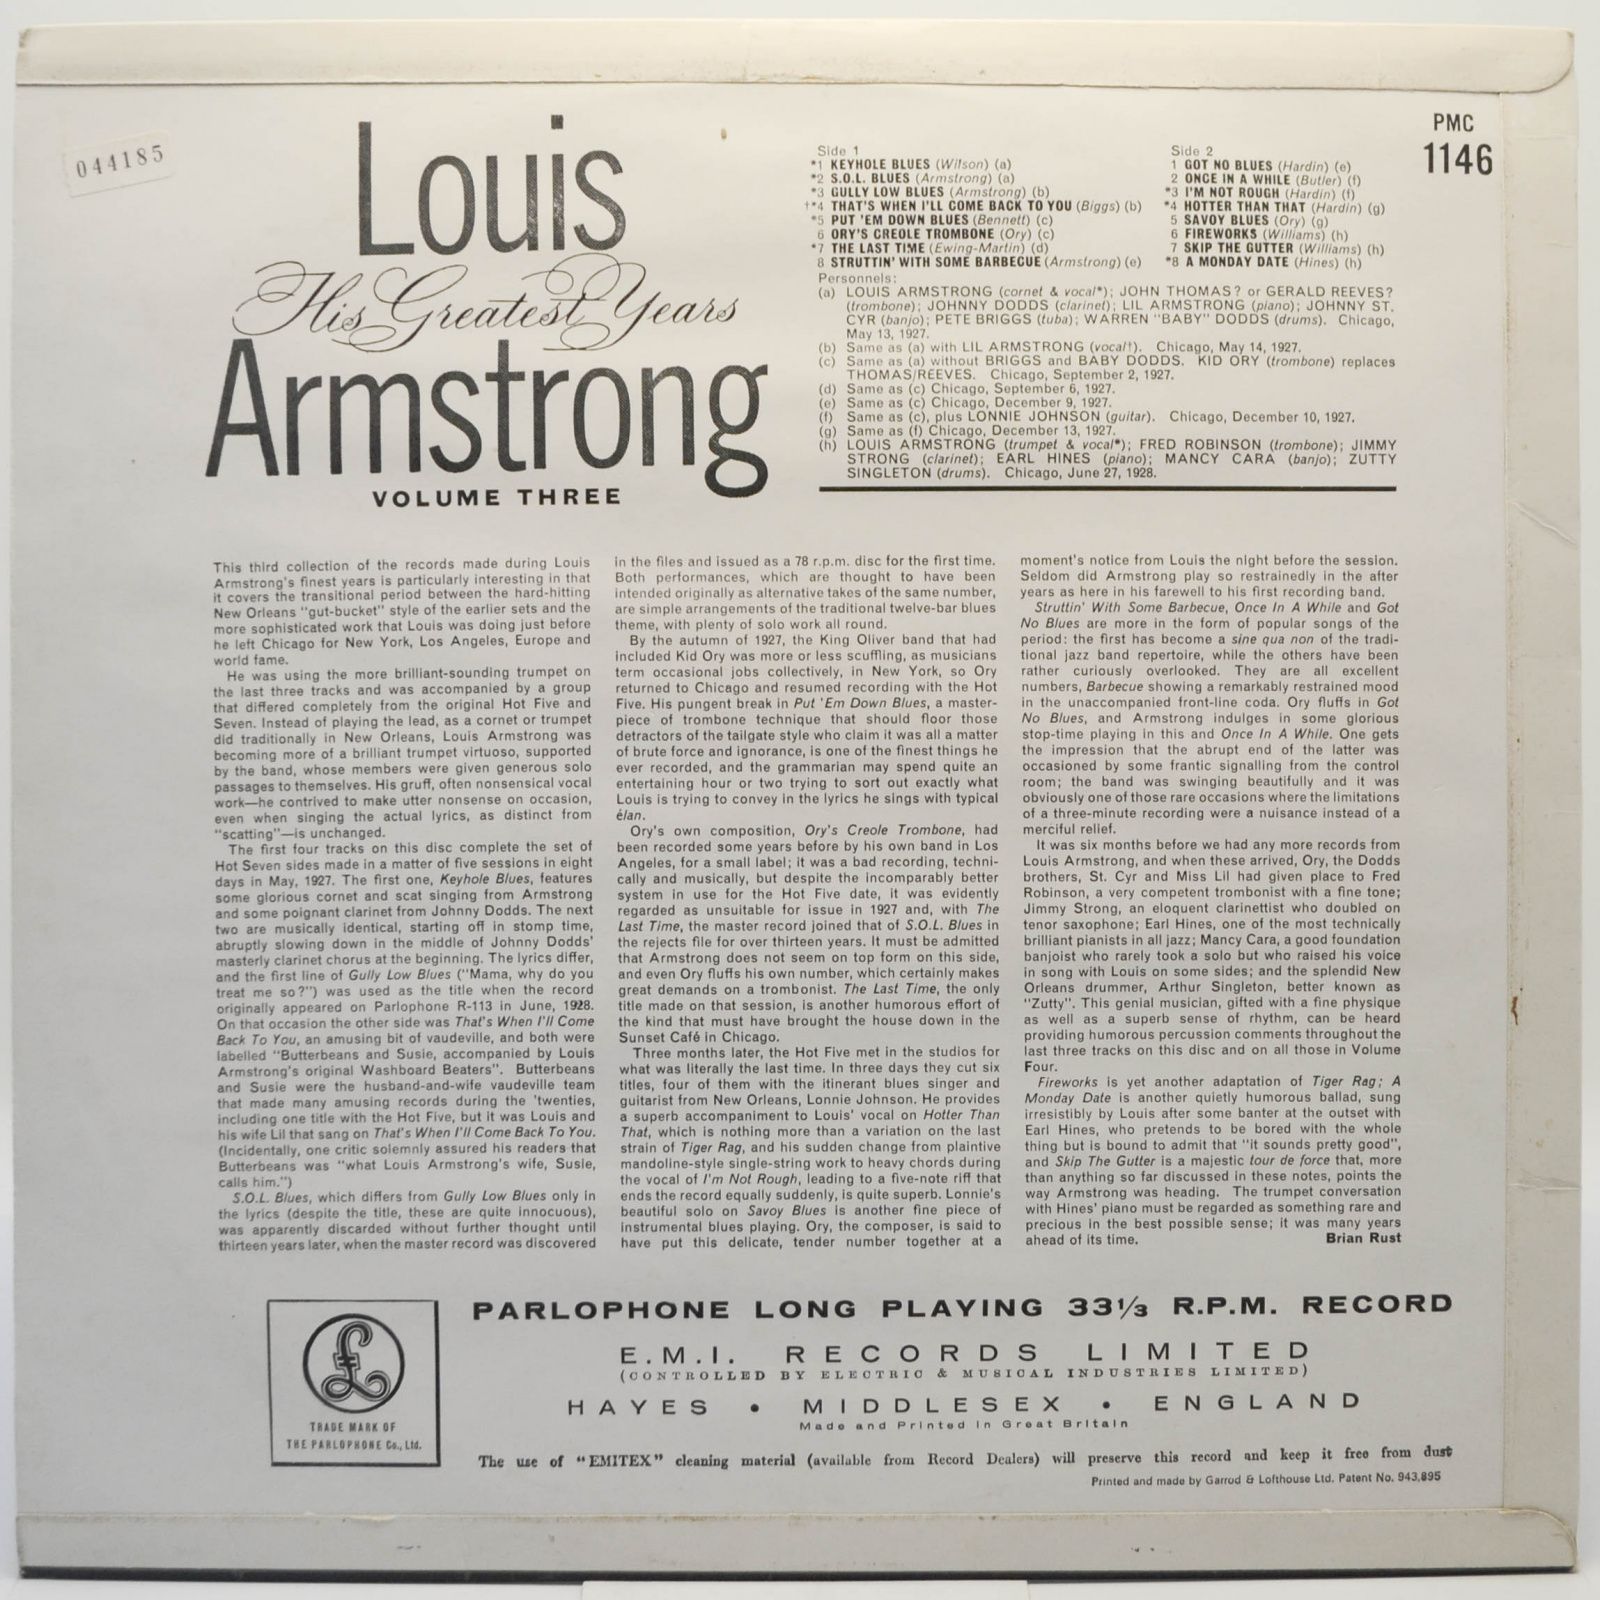 Louis Armstrong — His Greatest Years - Volume 3 (UK), 1961